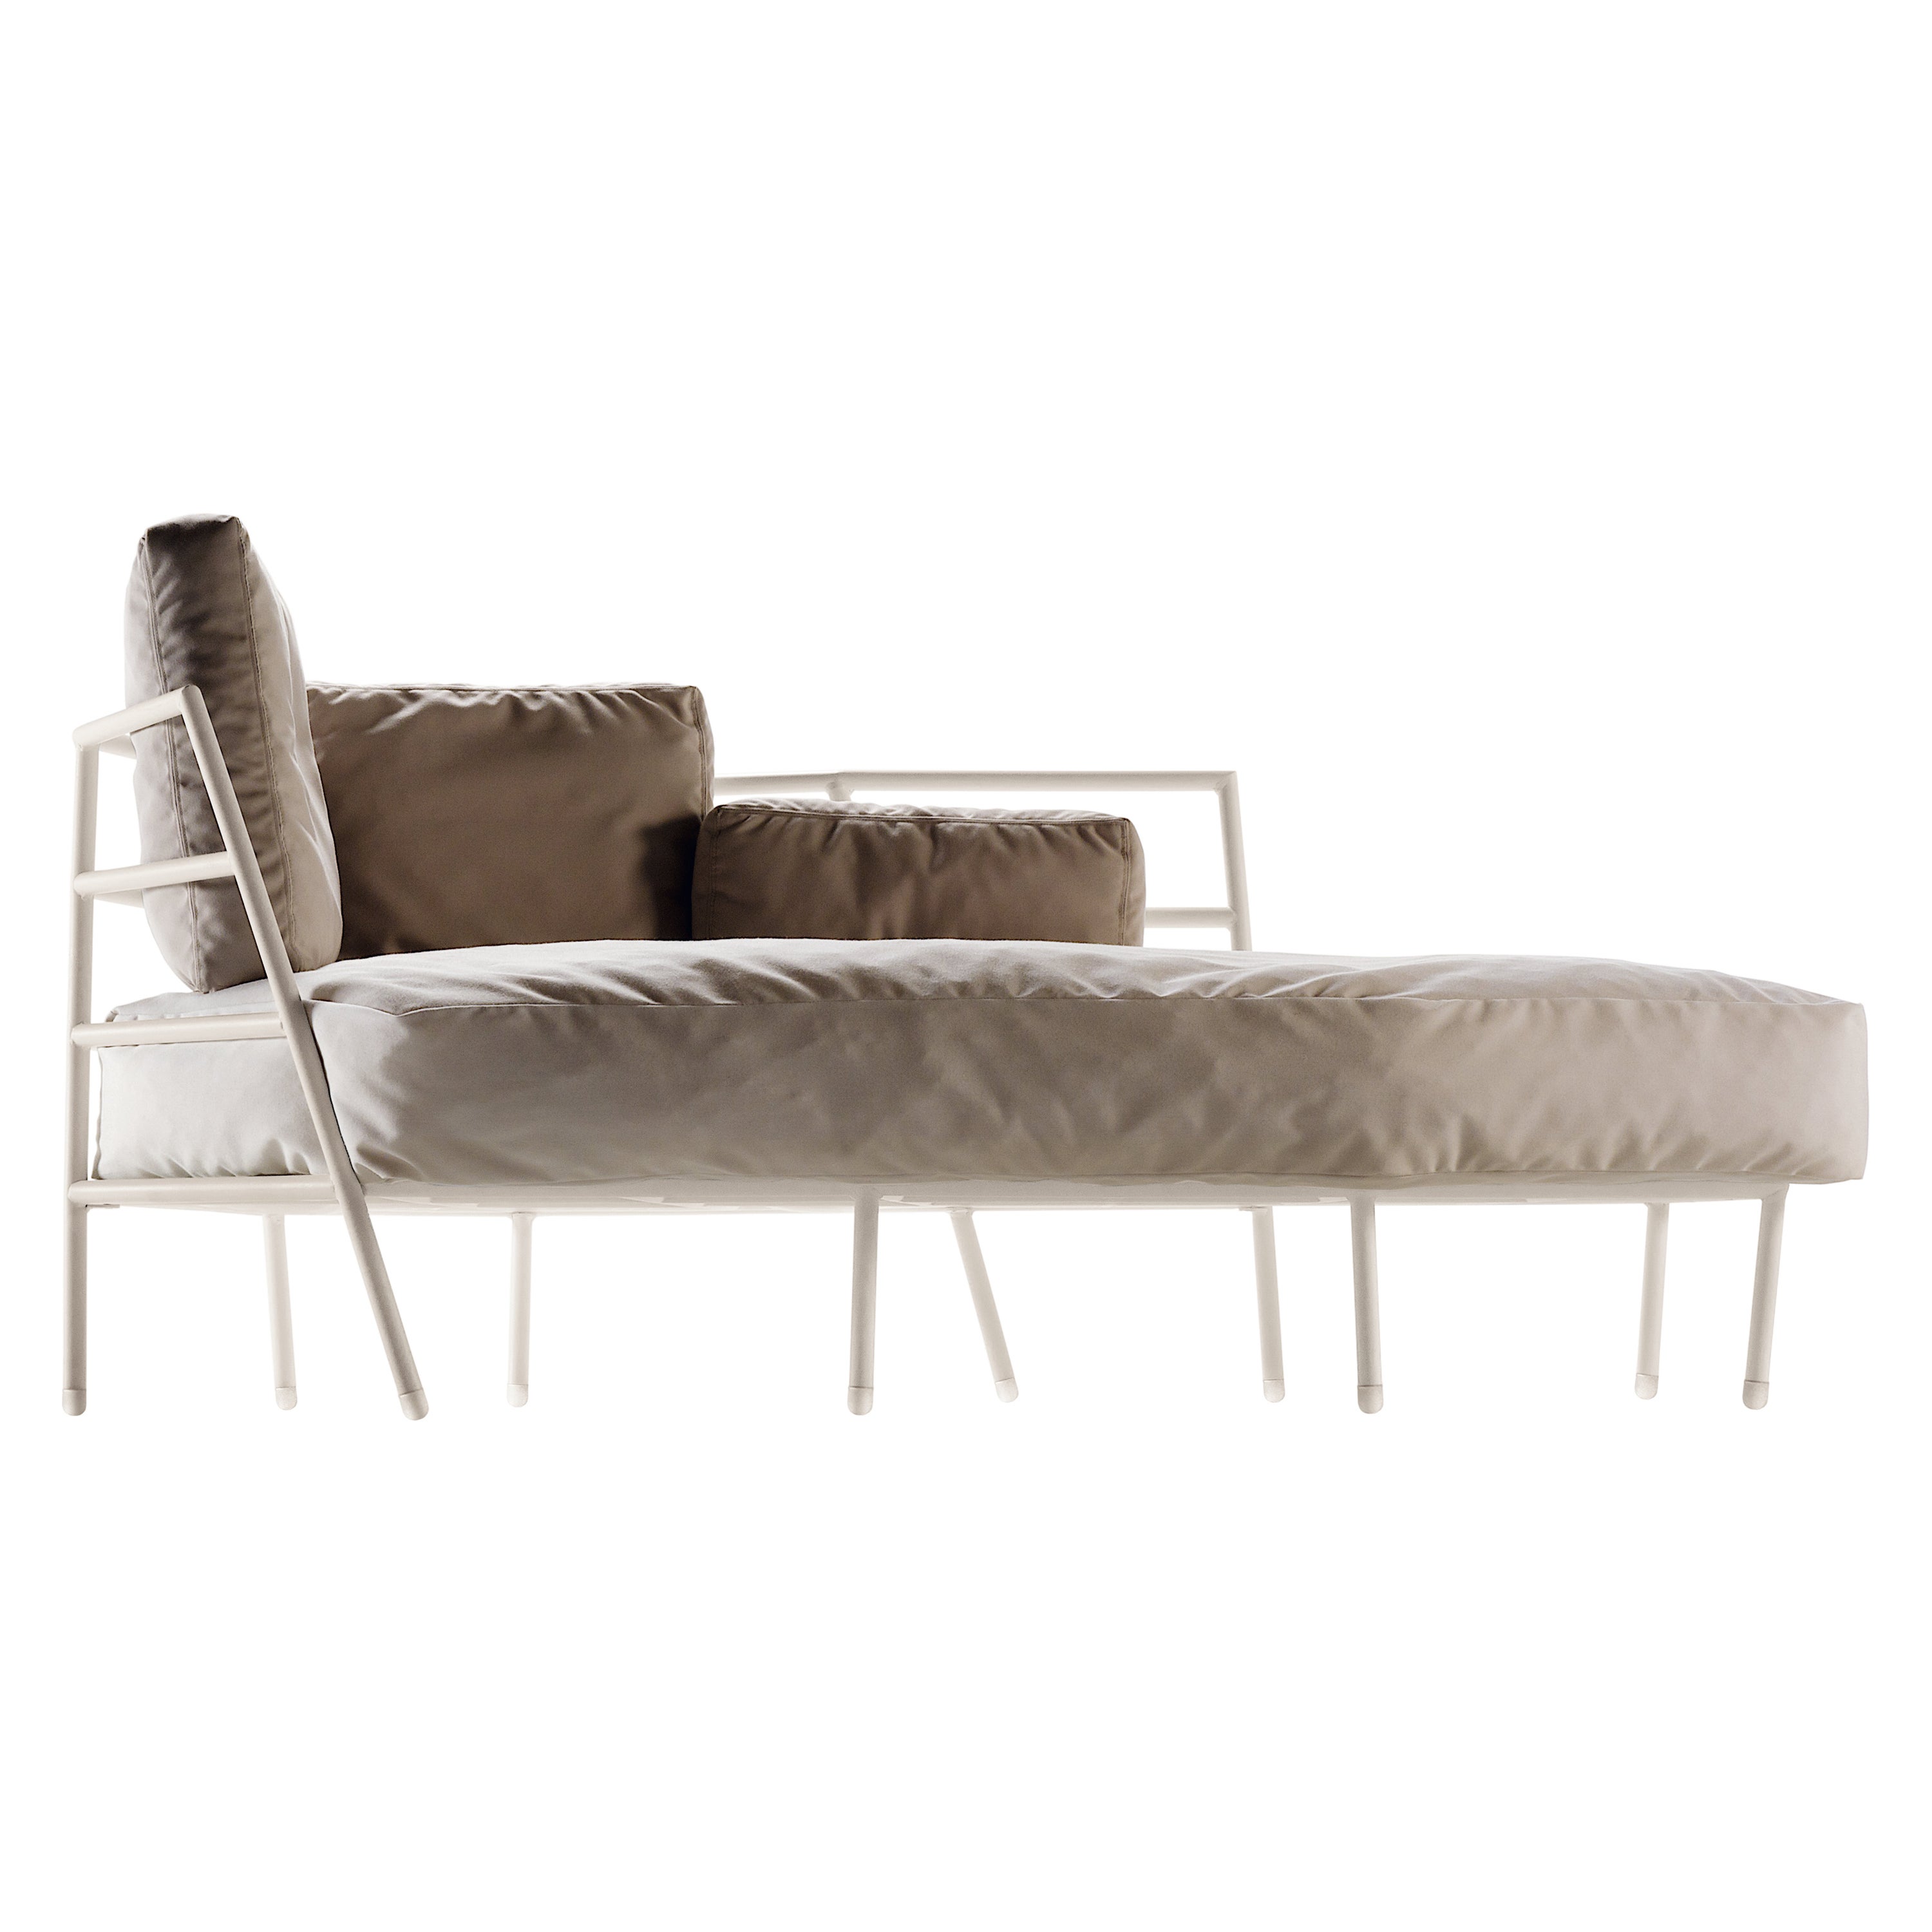 Alias 373_O Dehors Dormeuse Chair with Upholstery and White Lacquered Frame